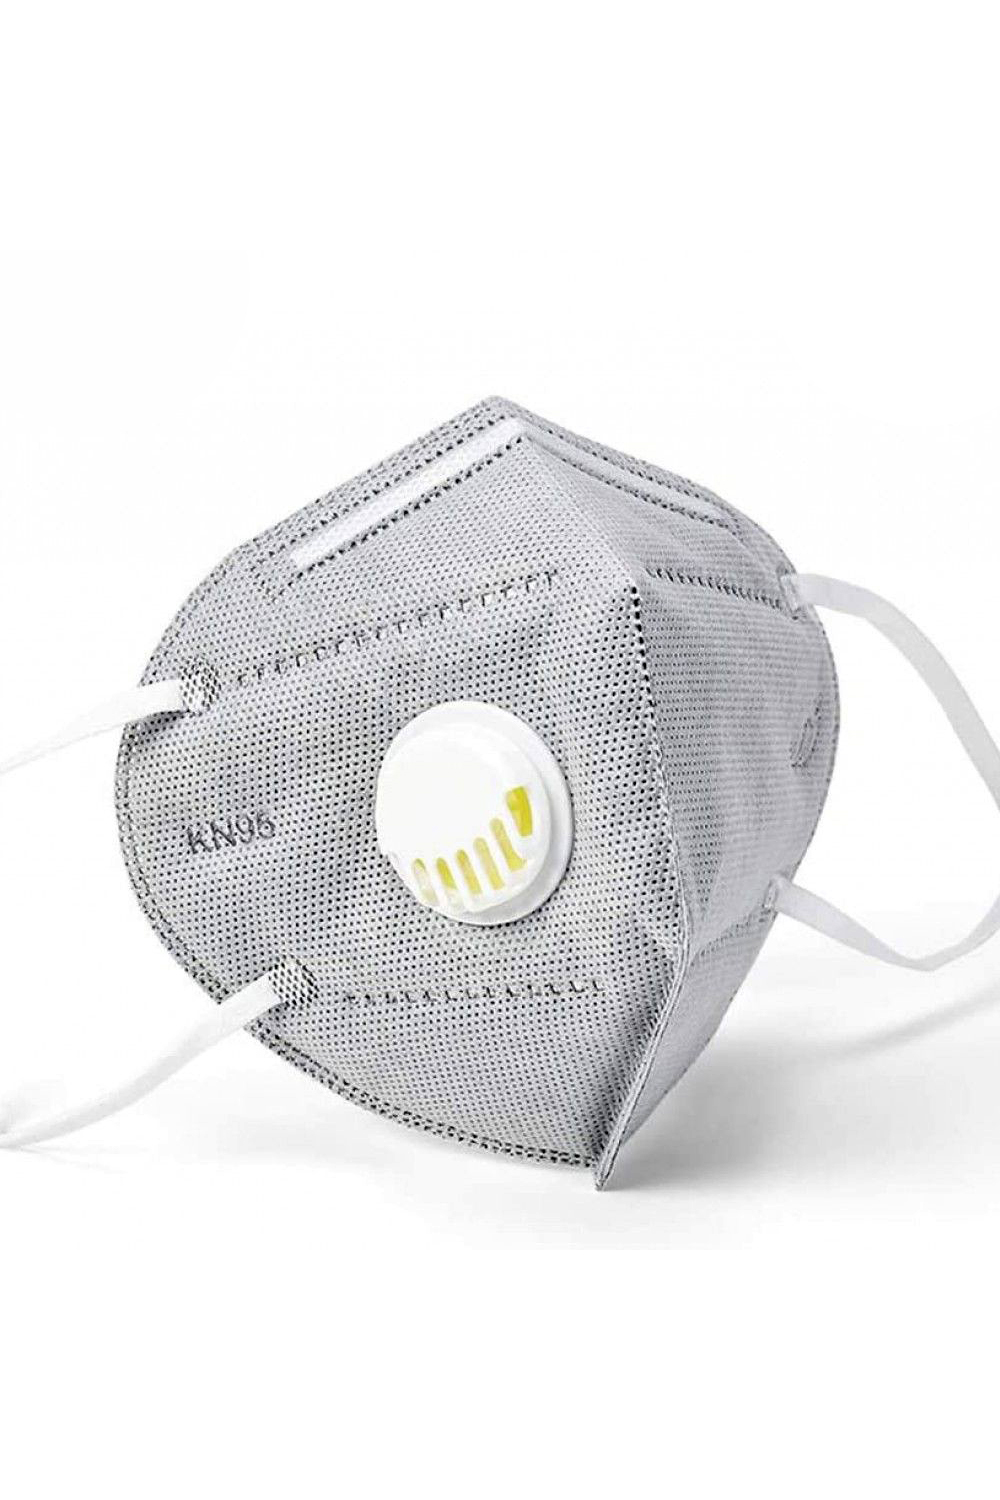 Heather Grey KN95 Face Mask with Air Valve - Individually Wrapped